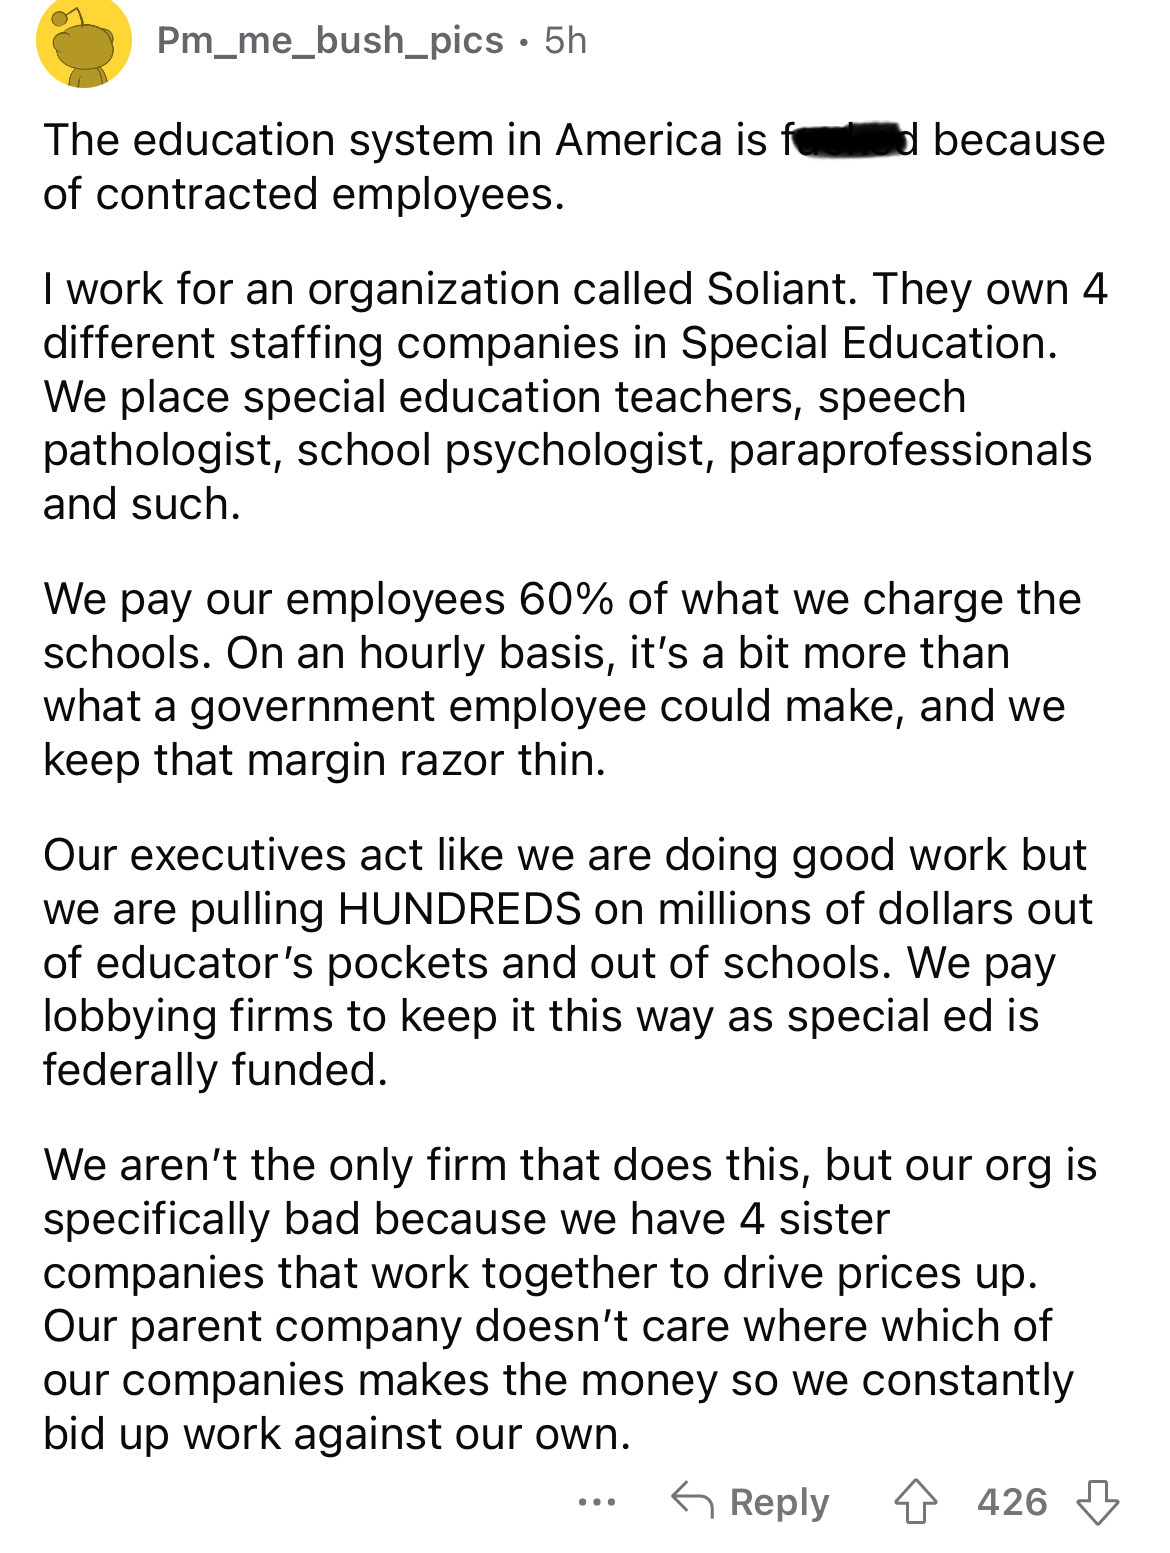 document - Pm_me_bush_pics 5h The education system in America is for d because of contracted employees. I work for an organization called Soliant. They own 4 different staffing companies in Special Education. We place special education teachers, speech pa